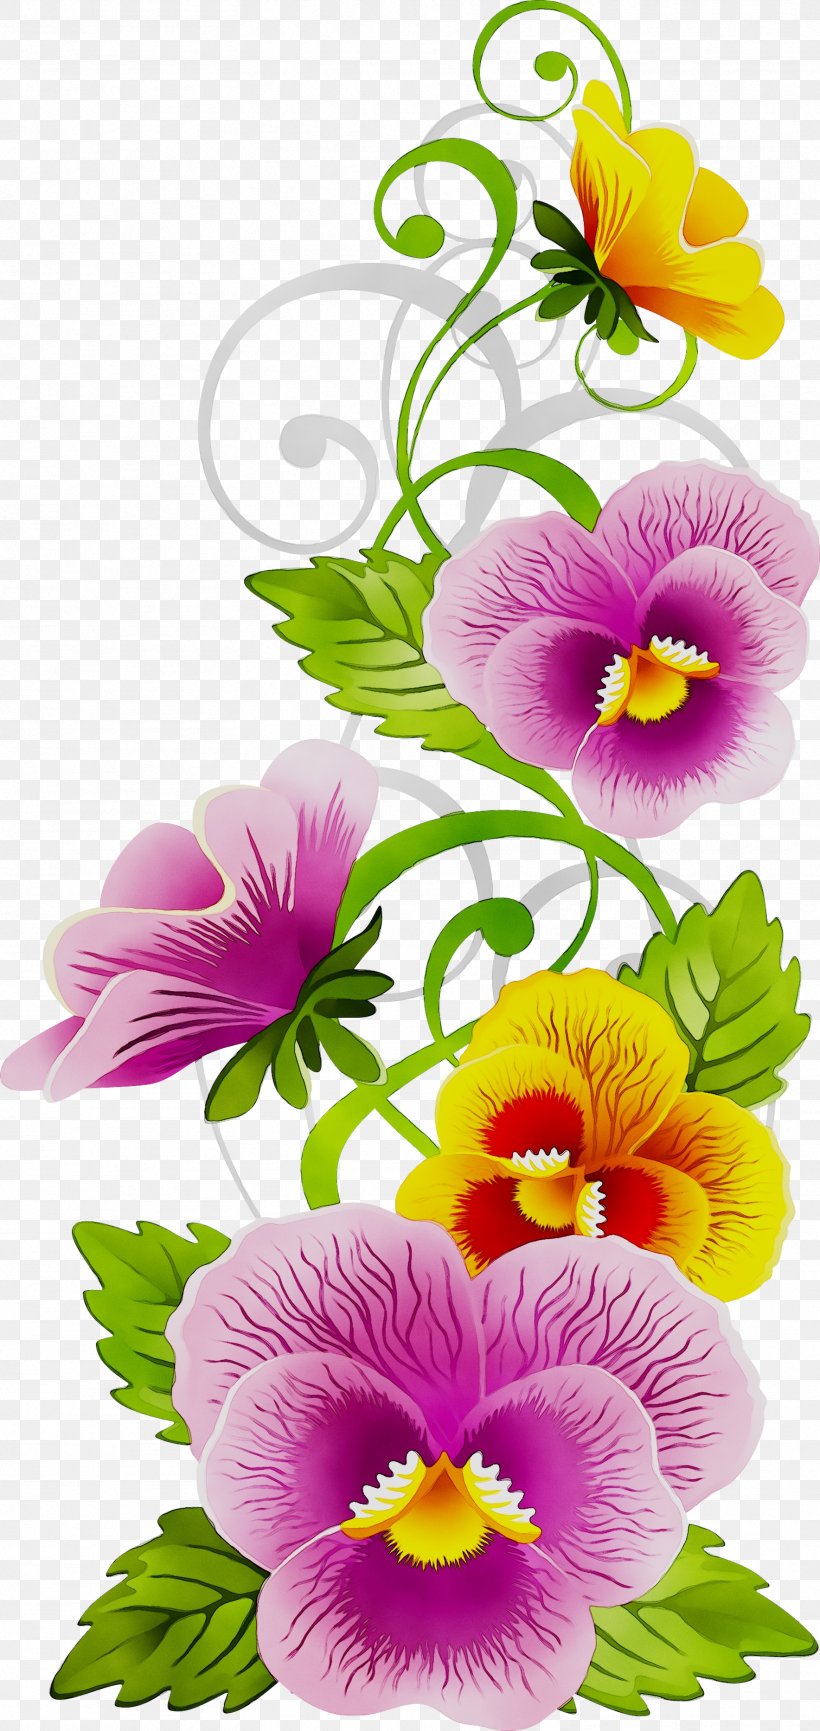 Illustration Design Photography Image, PNG, 1768x3733px, Photography, Bouquet, Floral Design, Flower, Flower Bouquet Download Free